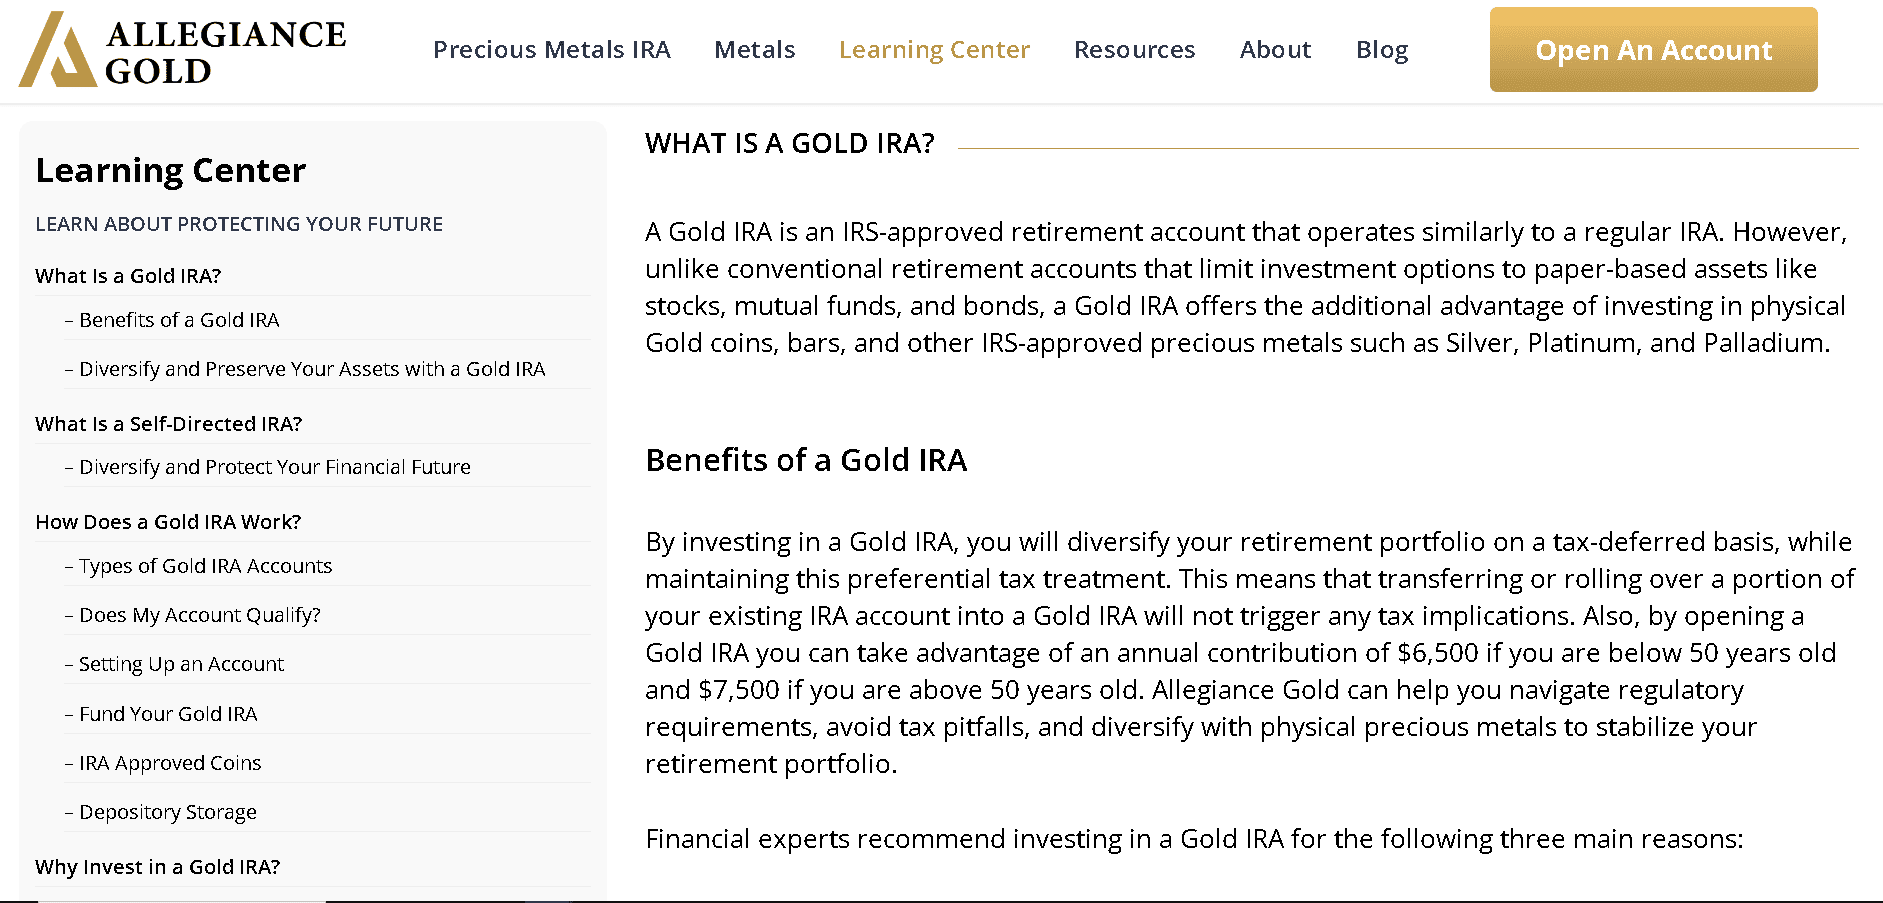 Allegiance Gold lets you open a gold IRA account with them